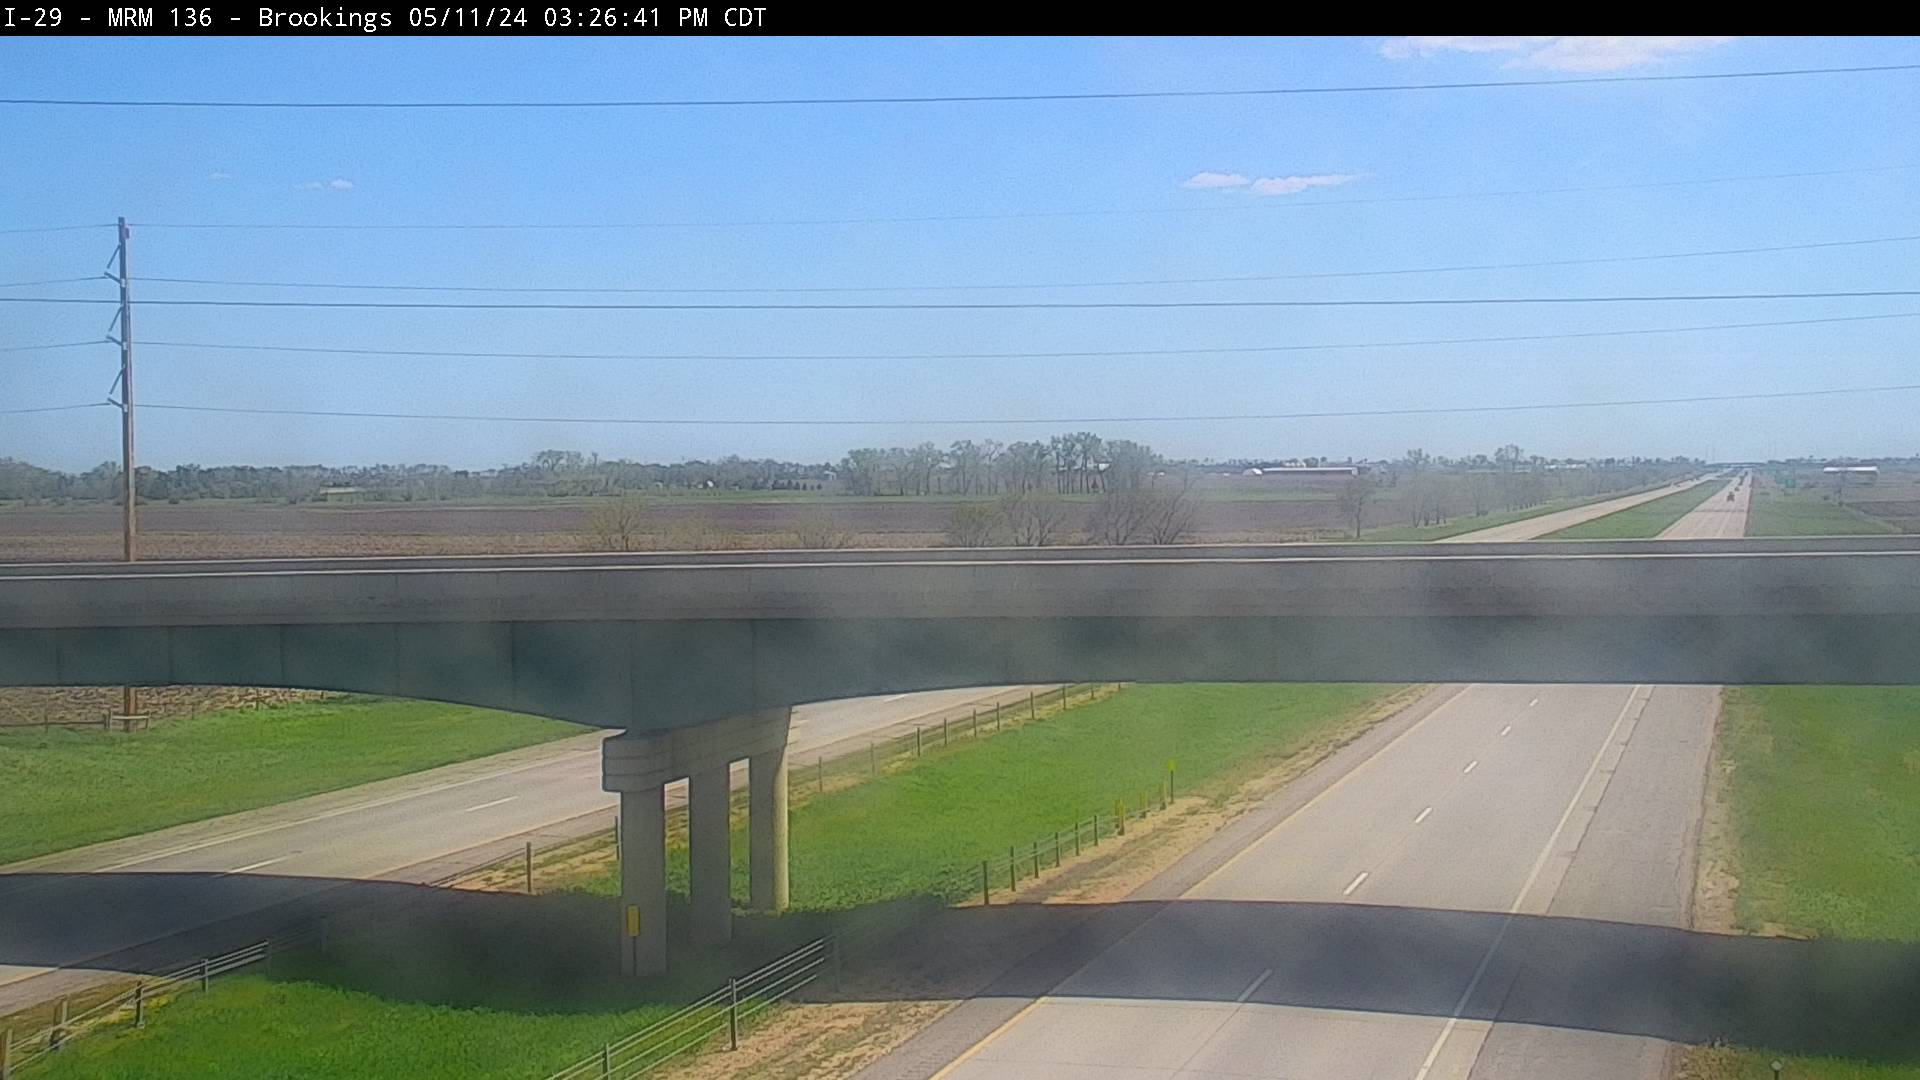 Traffic Cam North of town along I-29 @ MP 135.9 - South Player